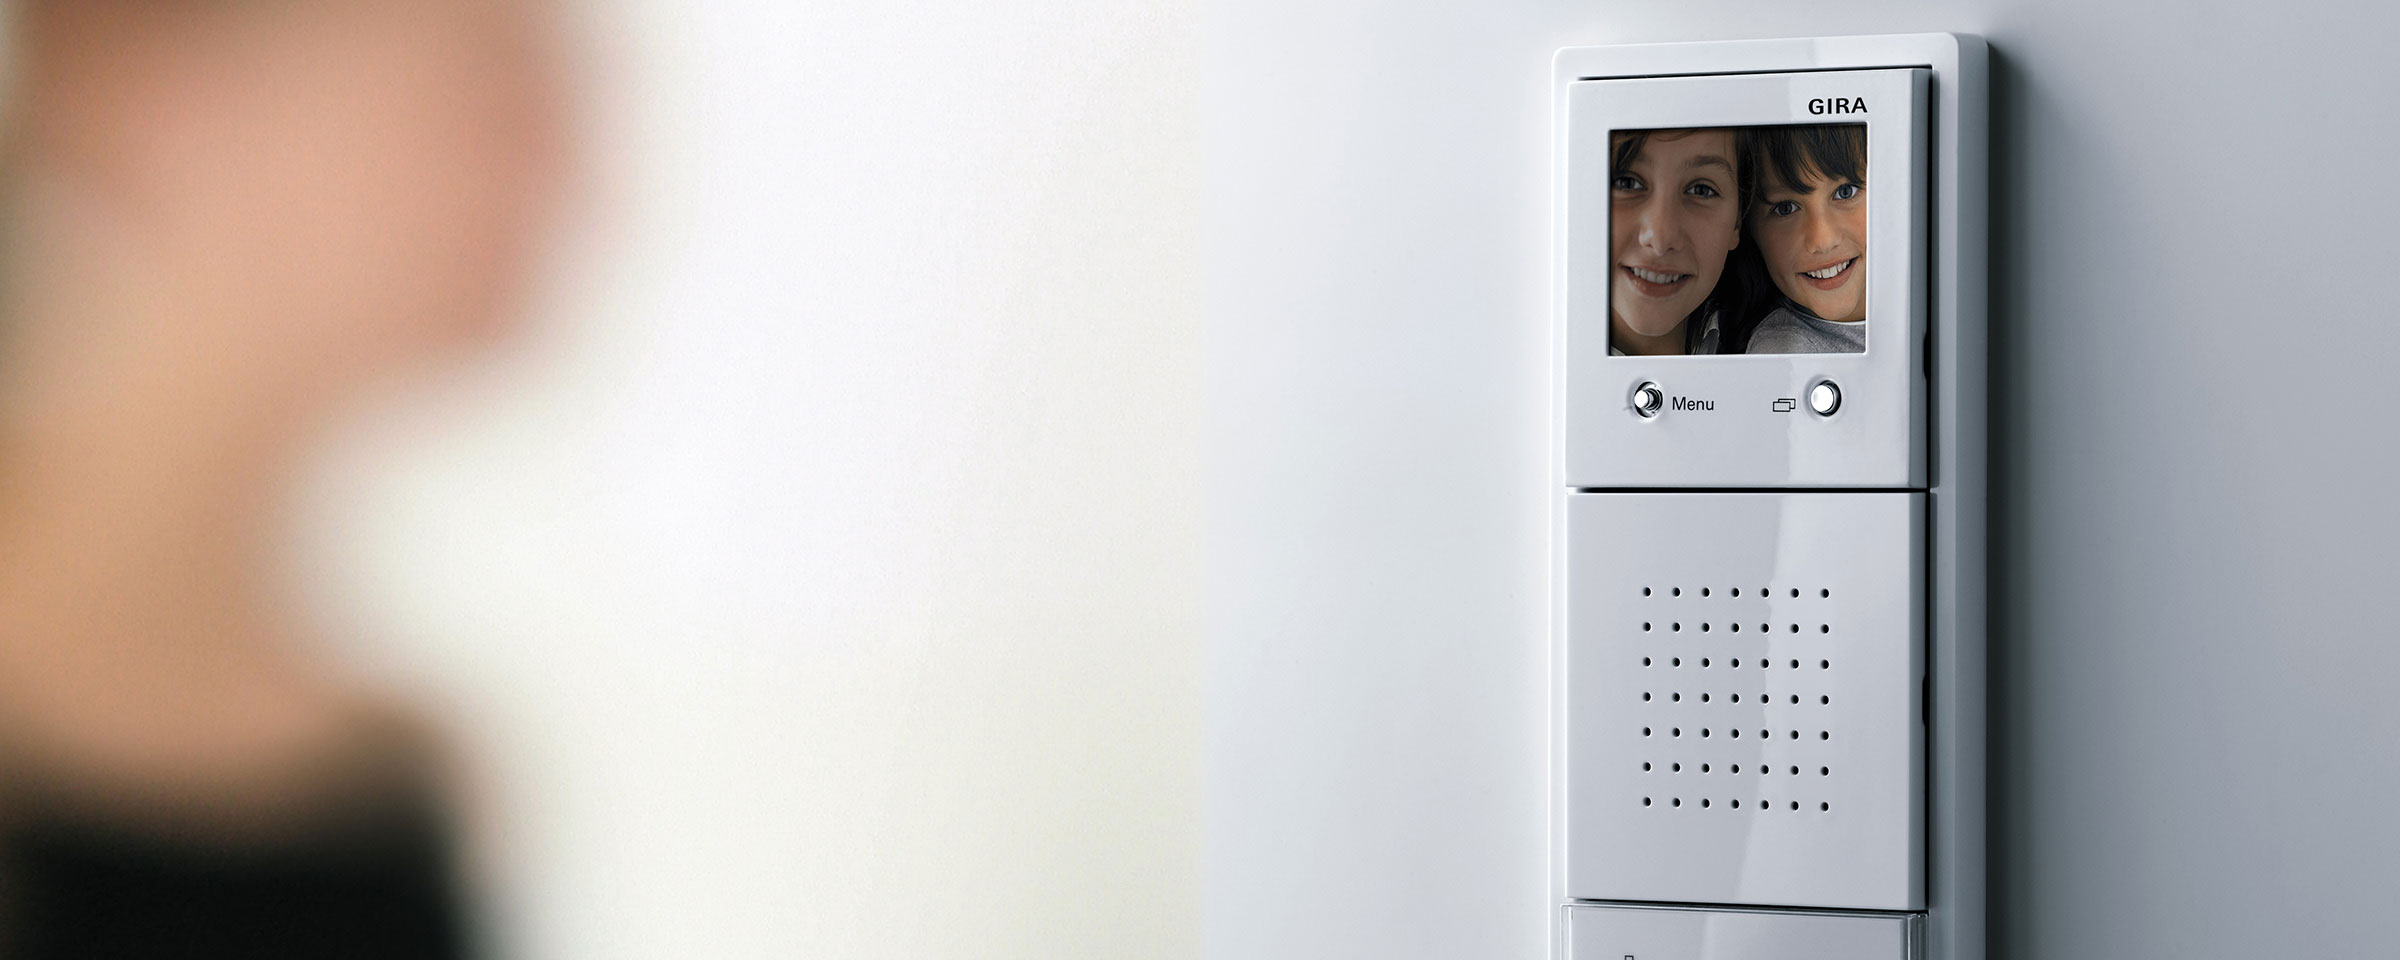 White door communication system, with a person in front of it, displays children on a monitor